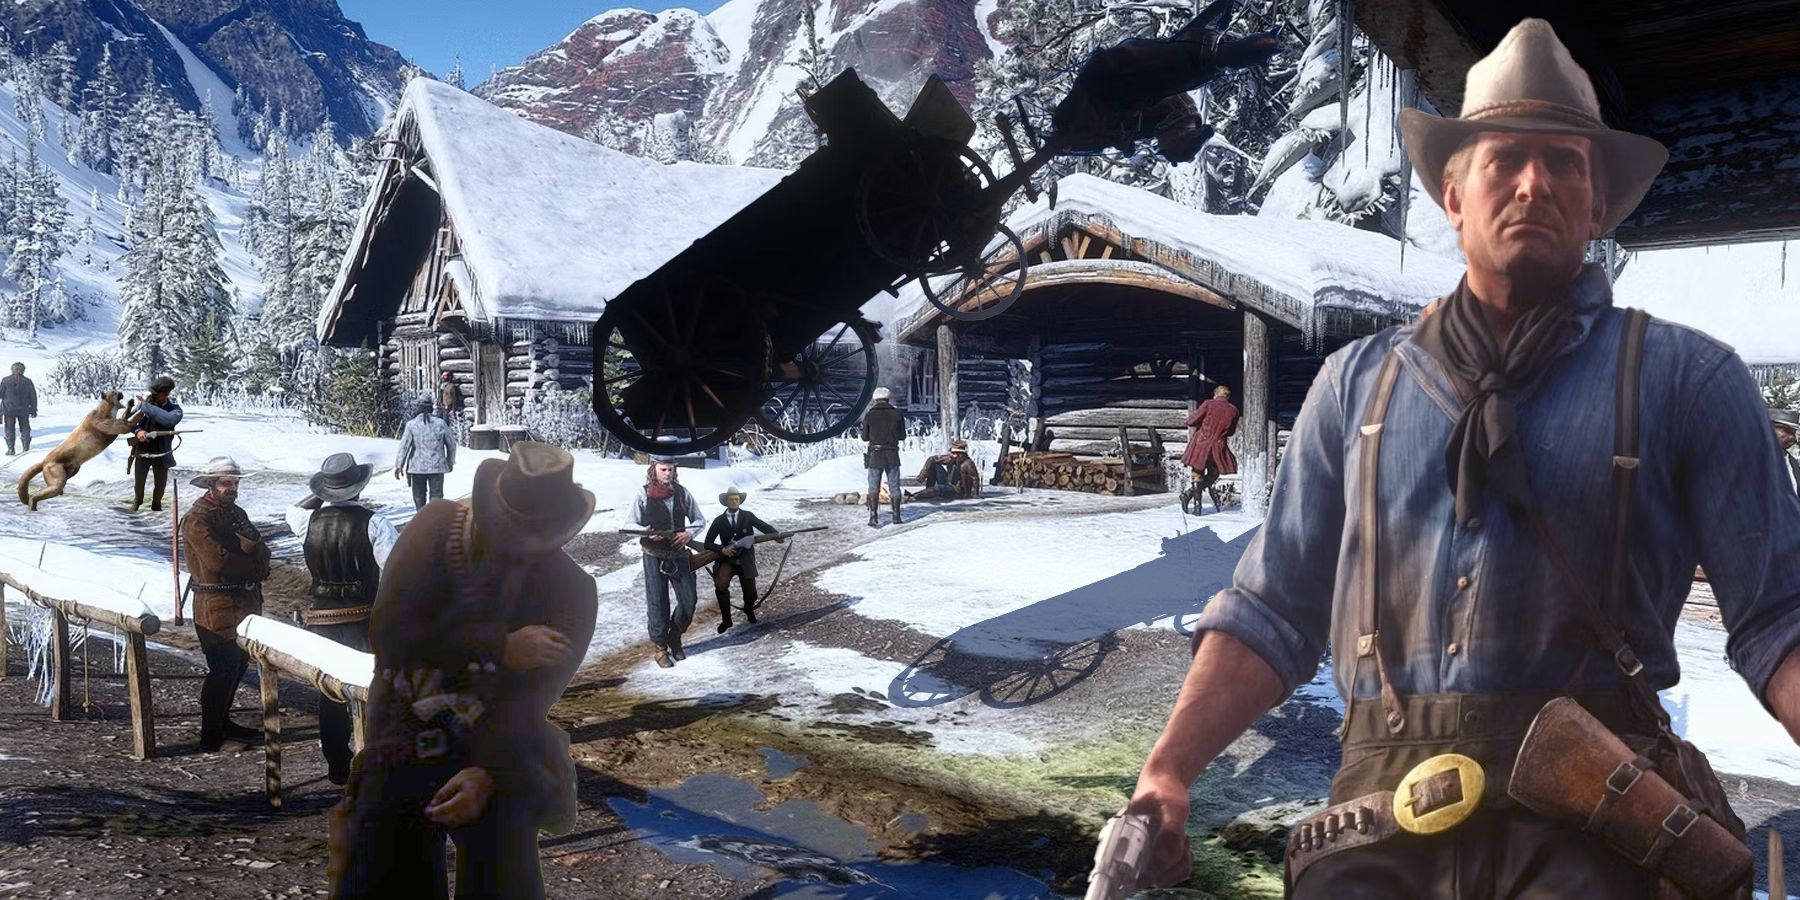 Arthur Morgan and various Red Dead Redemption 2 NPCs in a snowy environment